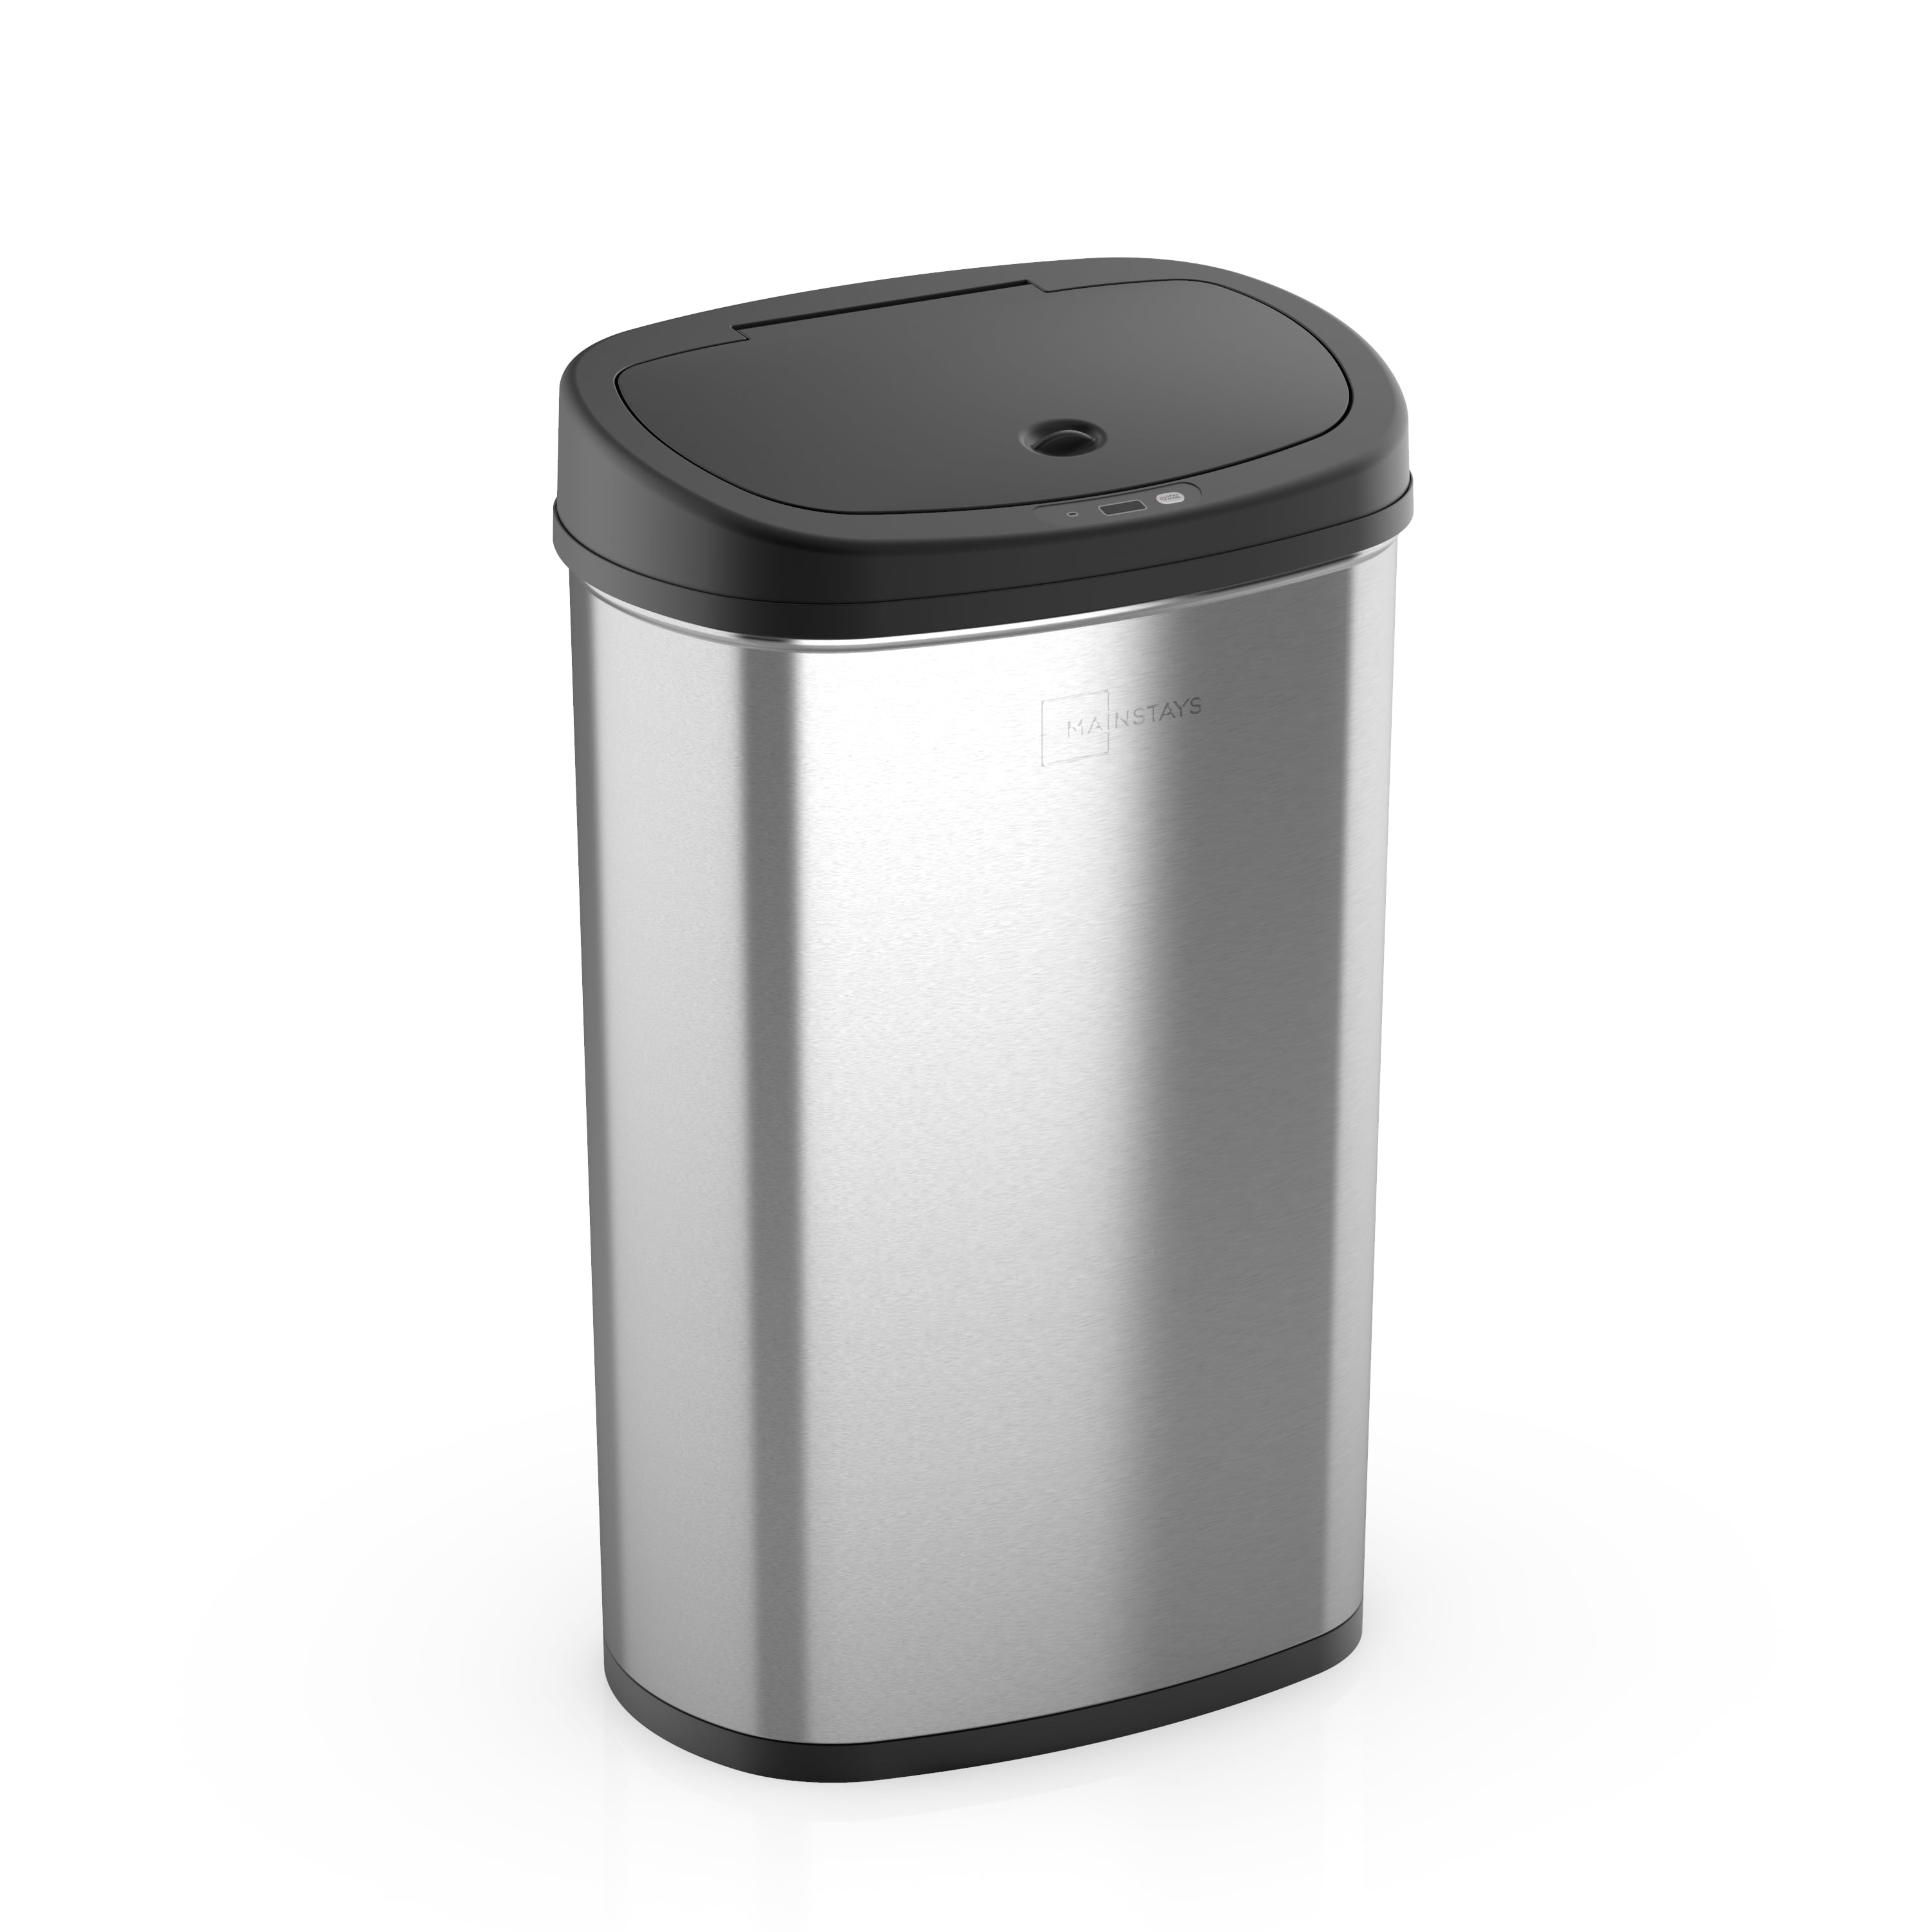 Stainless Steel 13.2 Gallon Mainstays MS-50-22 Motion Sensor Trash Can 